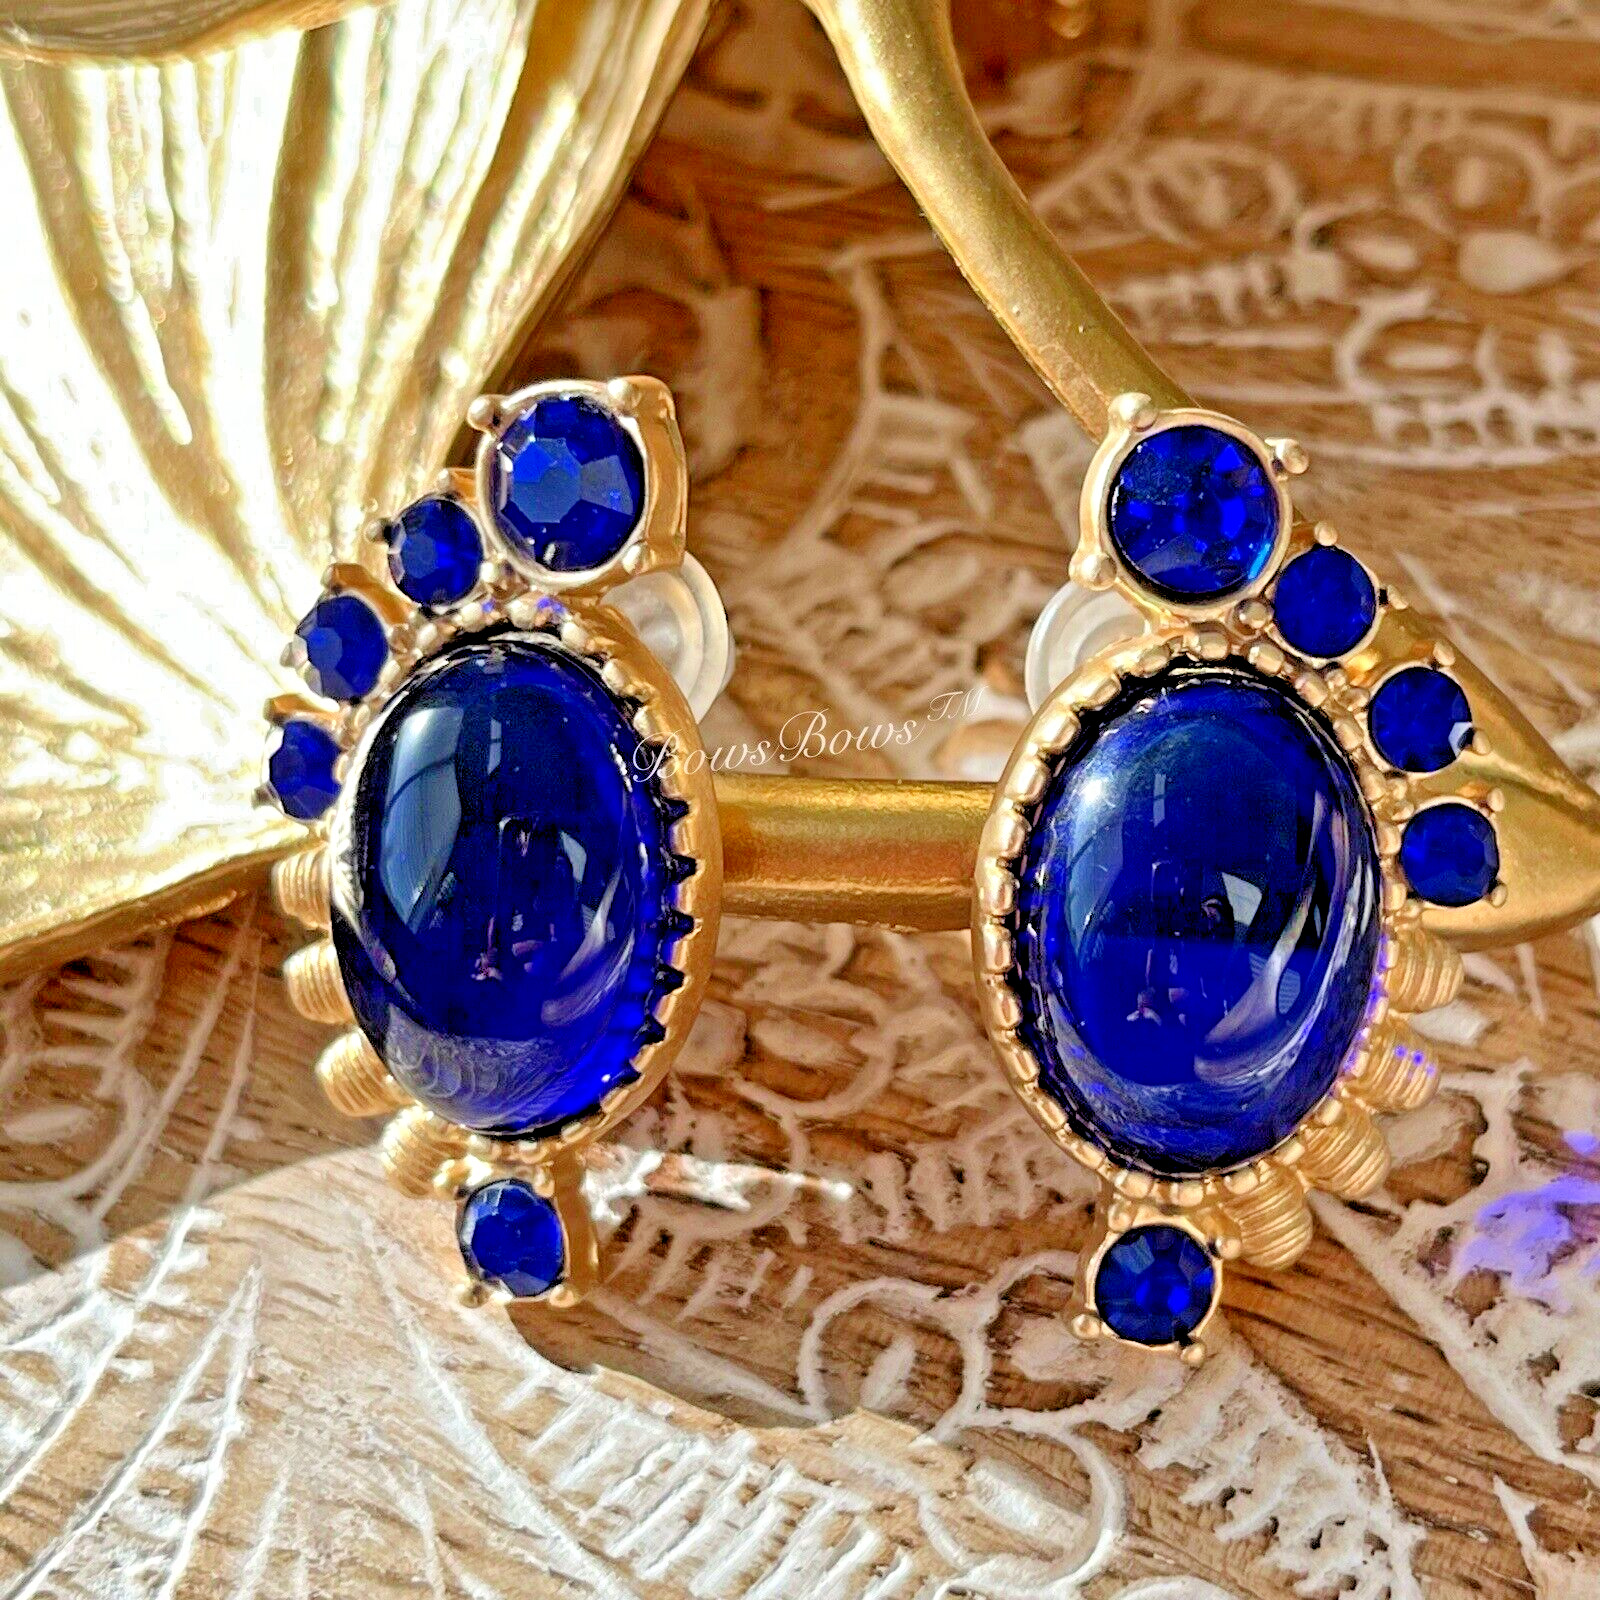 Brand NEW Vintage European Gold Plated Cabochon Resin Earring Silver Post VTGWRD